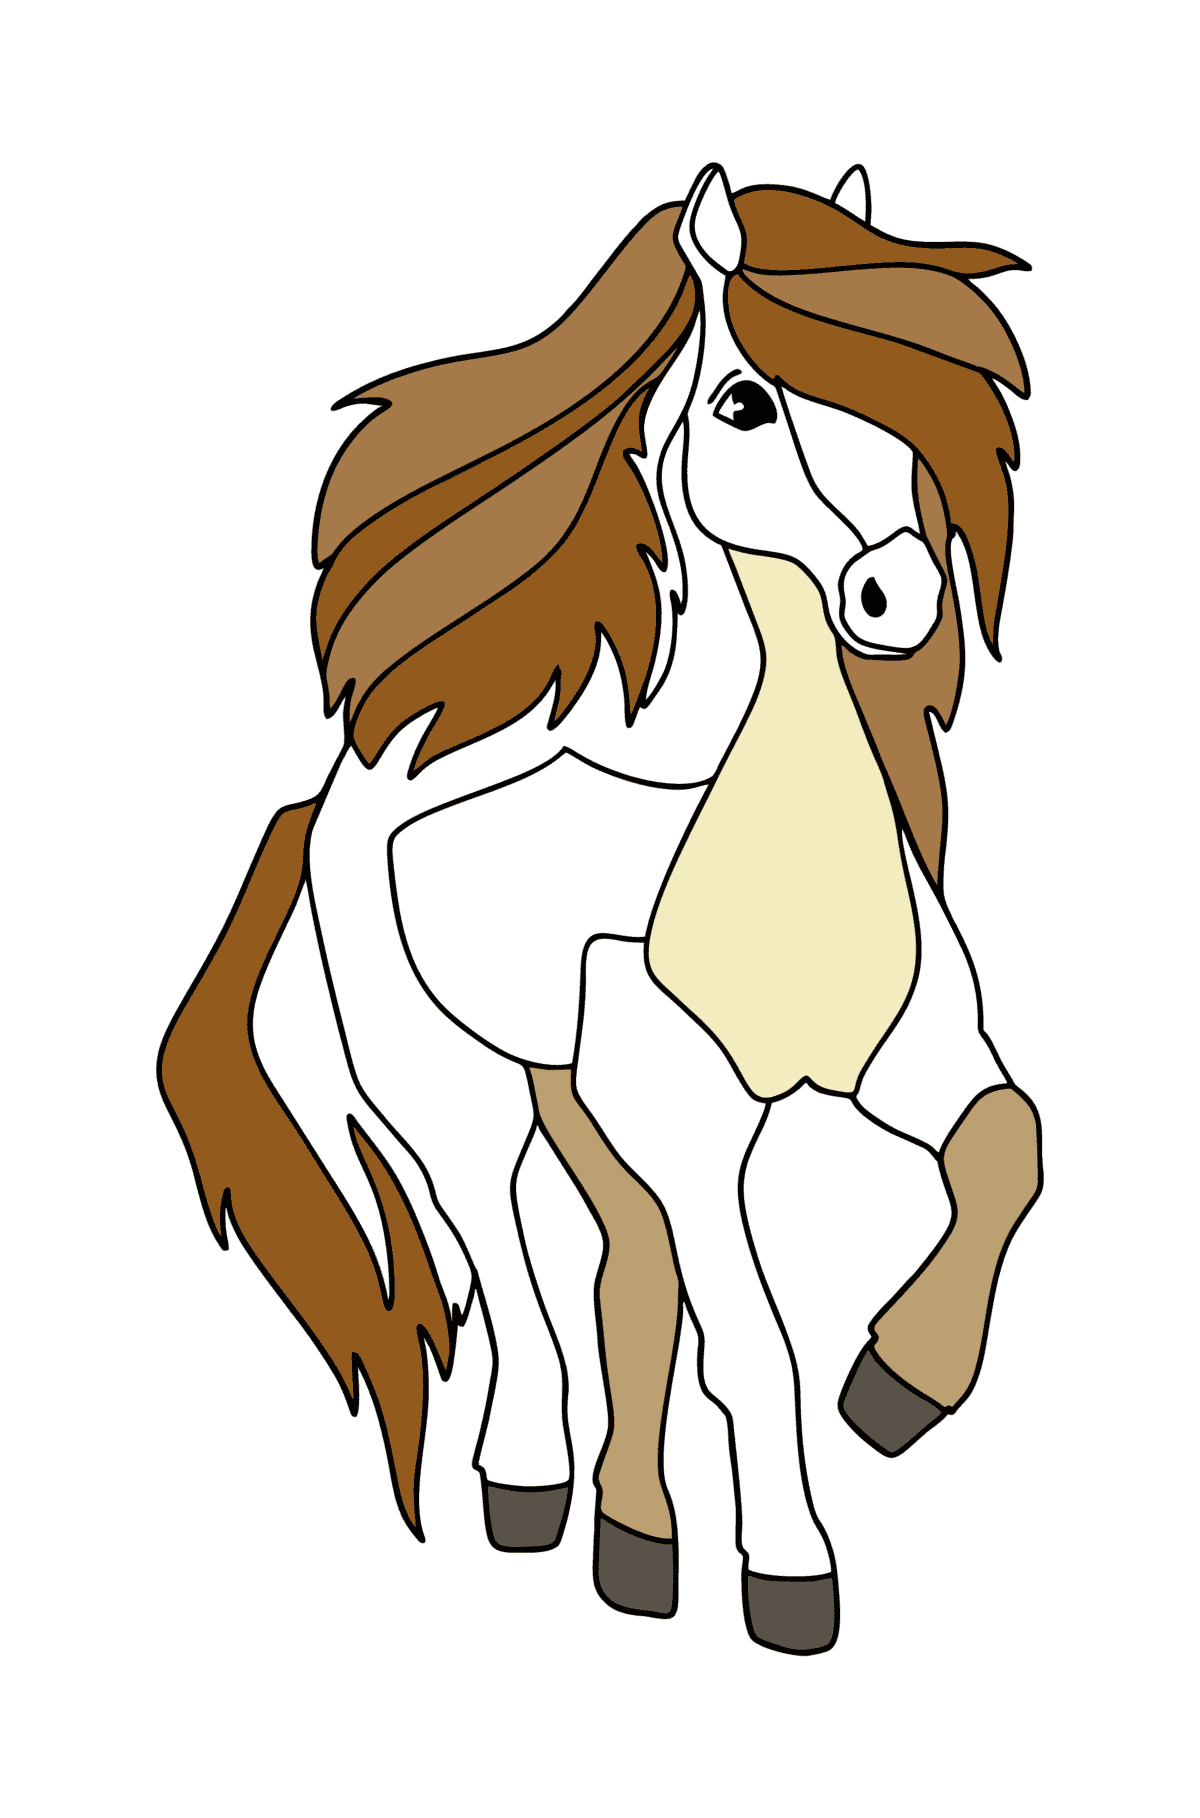 Simple horse сoloring page - Coloring Pages for Kids